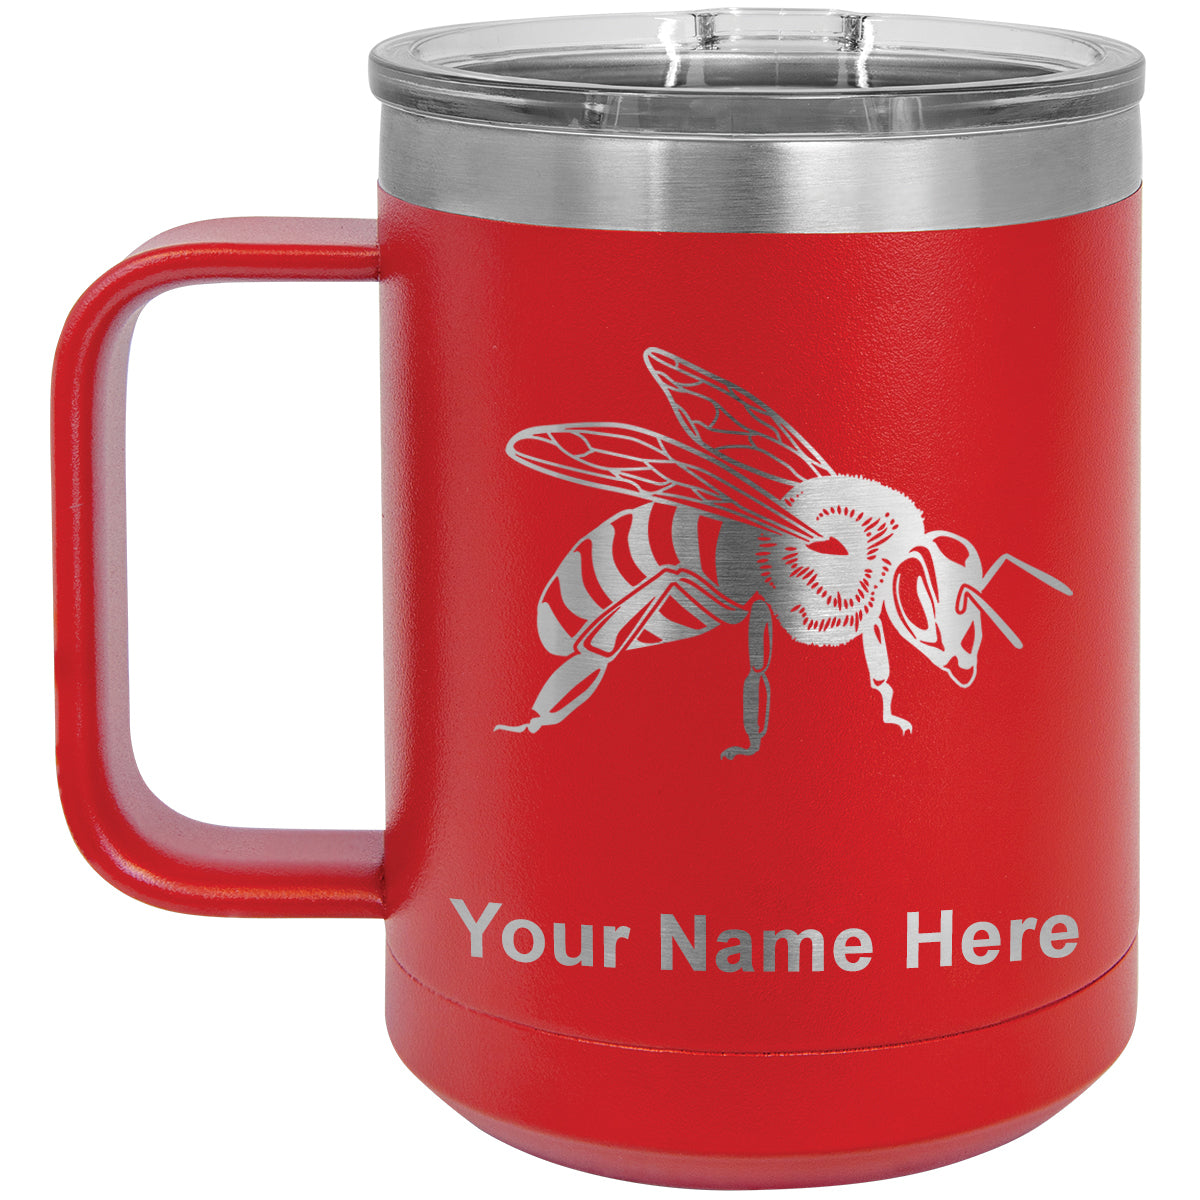 15oz Vacuum Insulated Coffee Mug, Honey Bee, Personalized Engraving Included